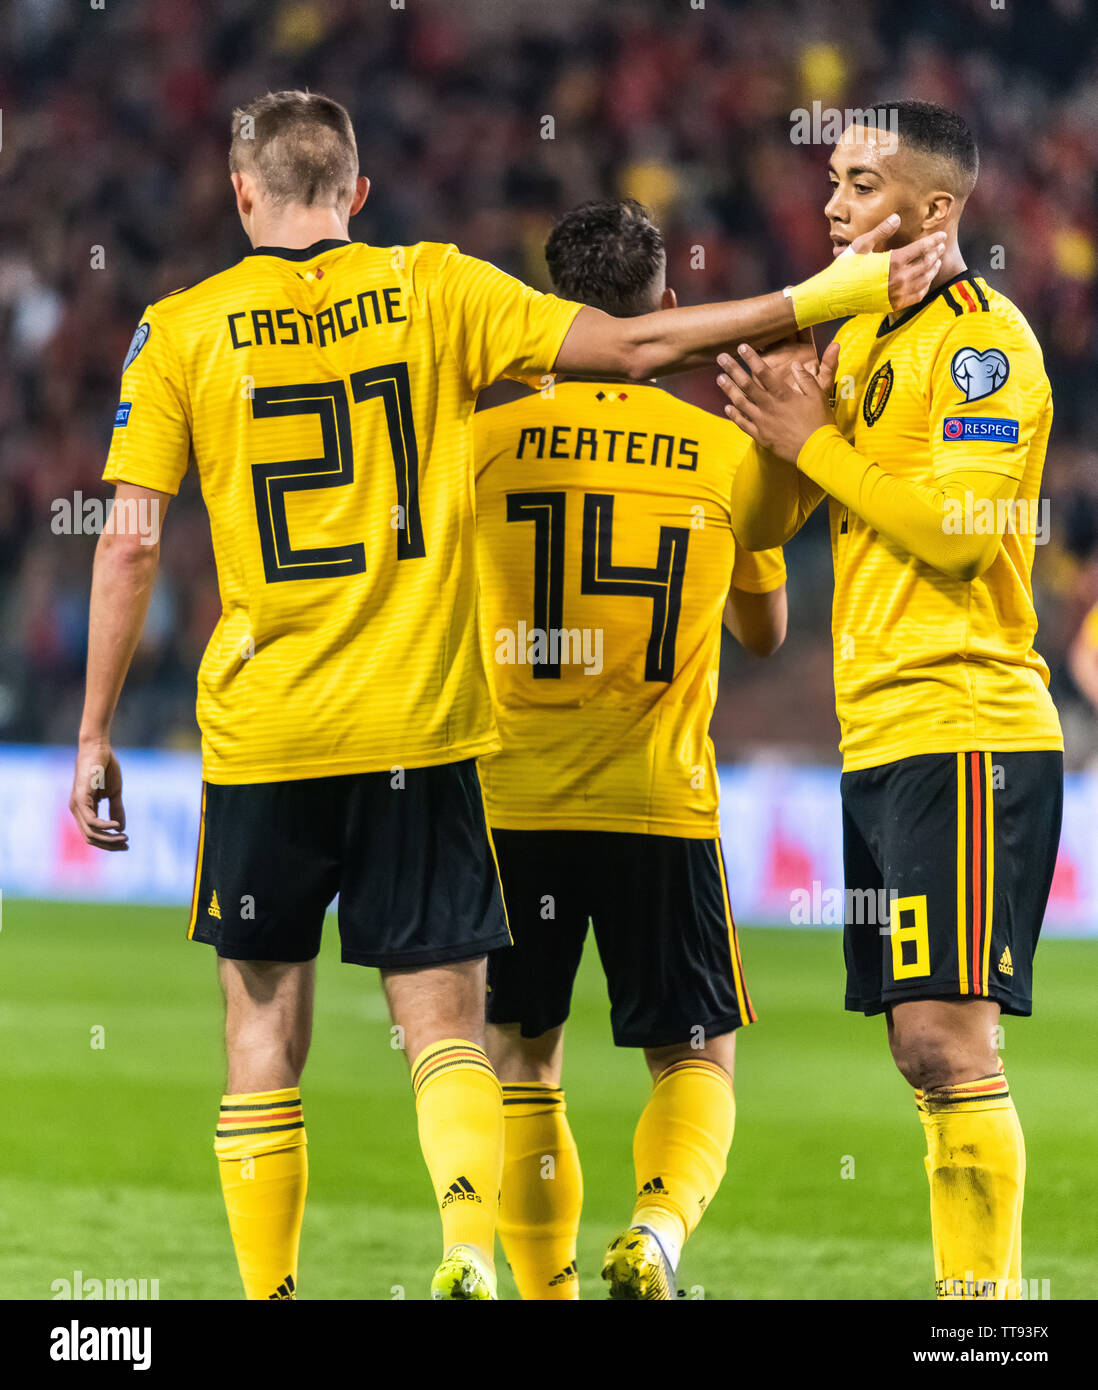 Brussels, Belgium - March 21, 2019. Belgium national football team players Timothy Castagne, Dries Mertens and Youri Thielemans celebrating a goal sco Stock Photo